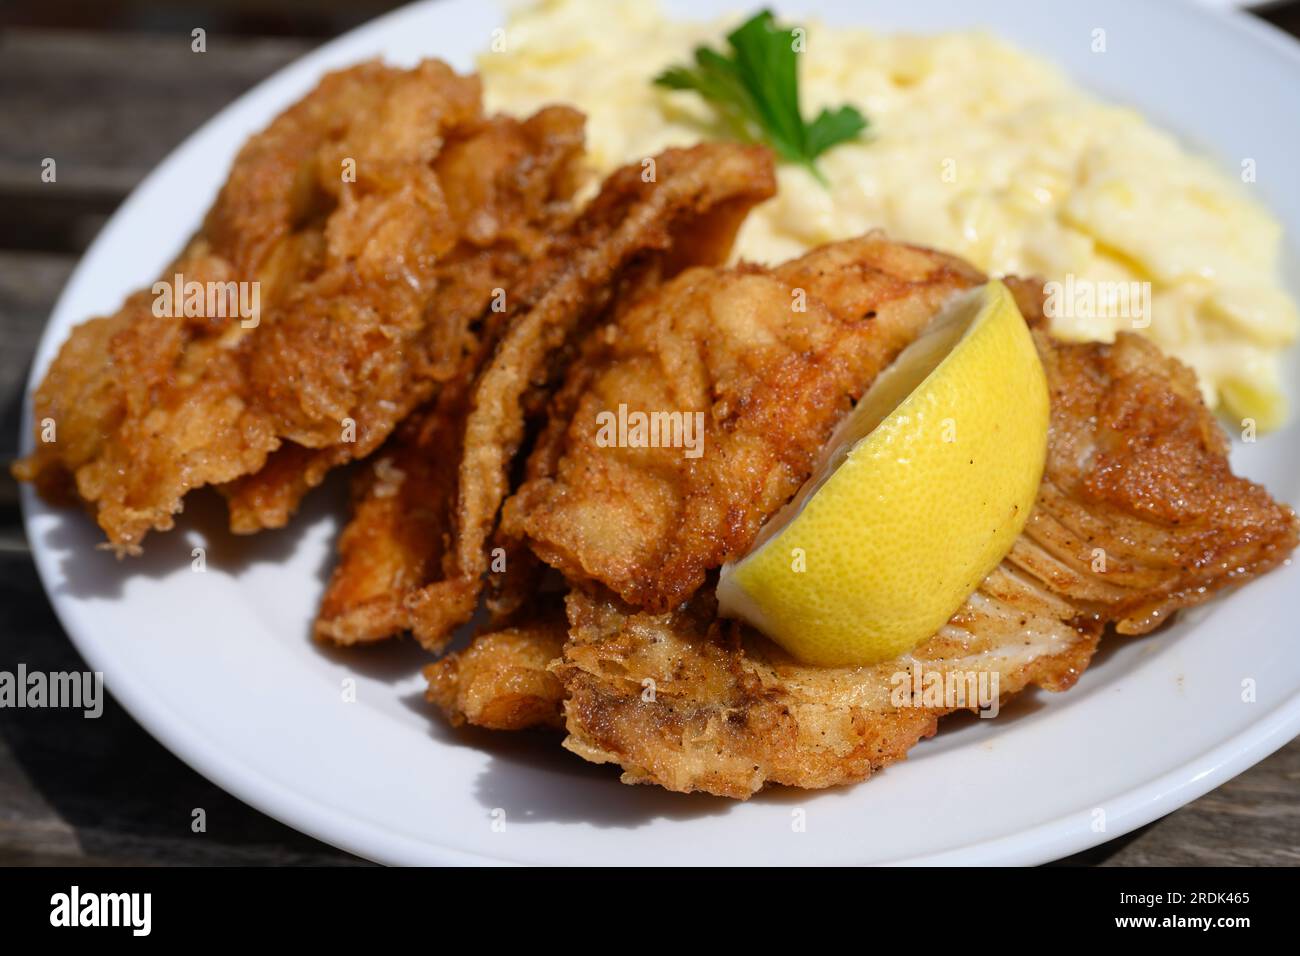 Backfisch Deep Fried Fish in Batter with Hamburg Style Potato Salad Close Up Stock Photo